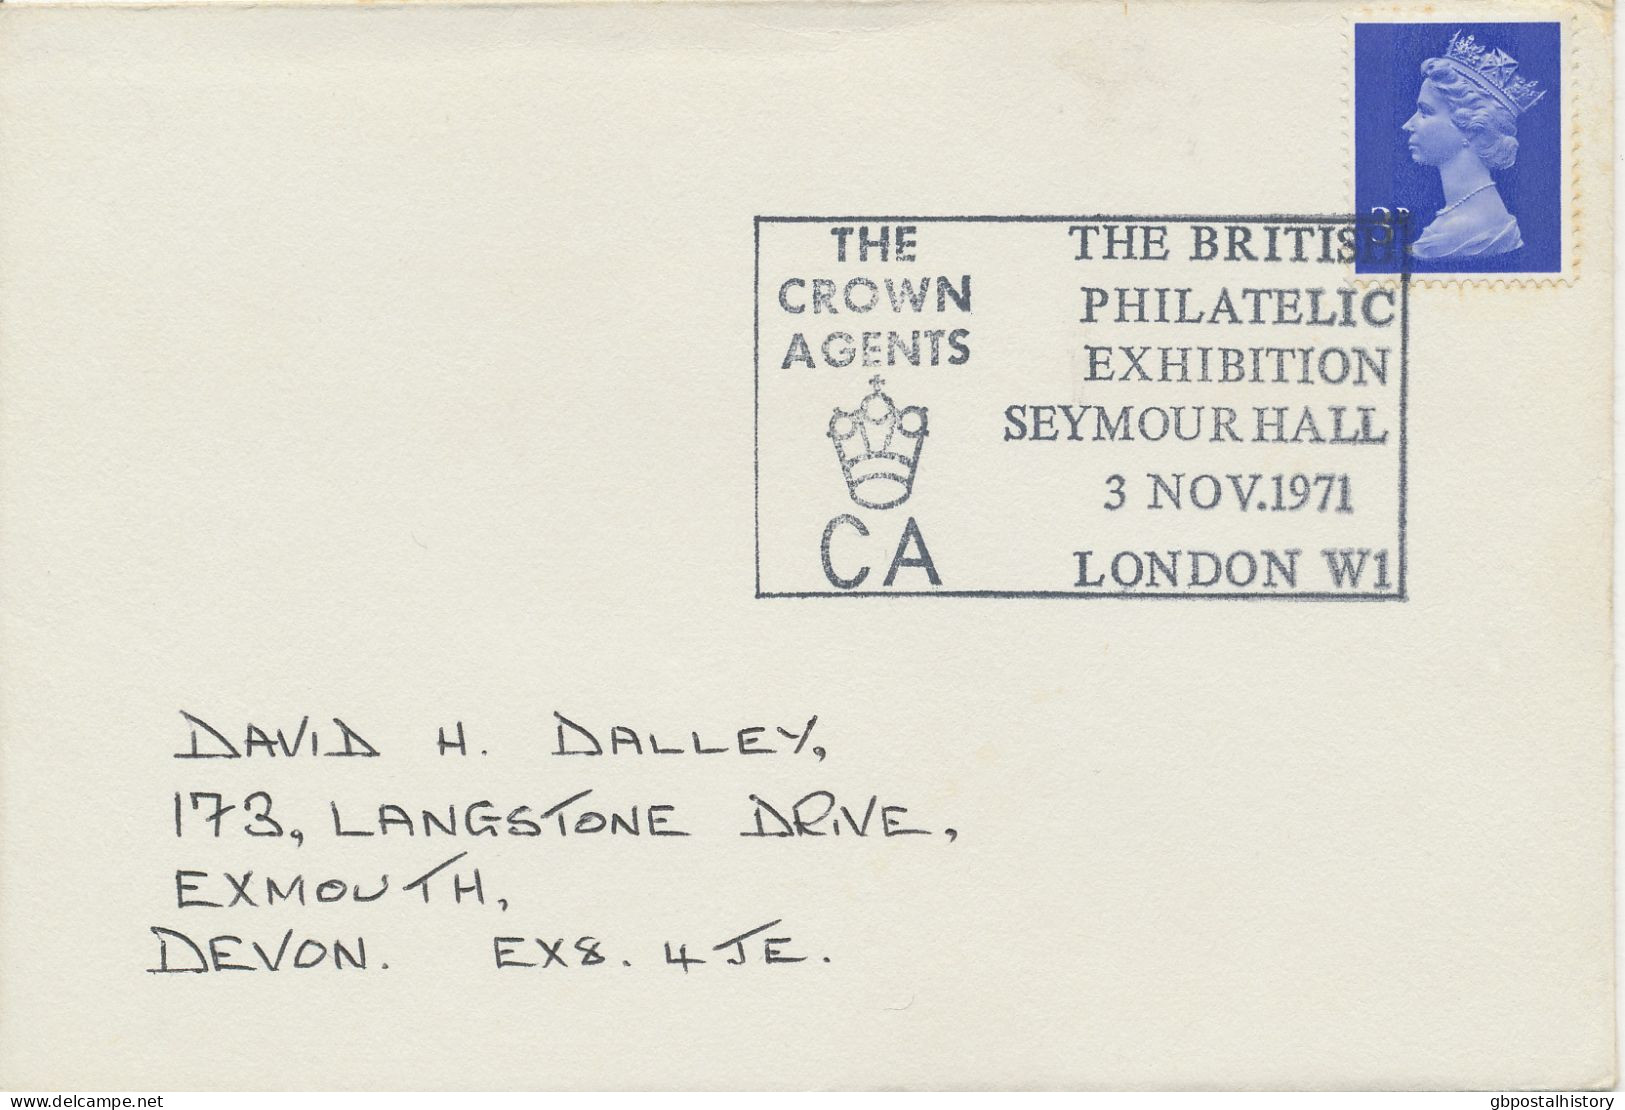 GB SPECIAL EVENT POSTMARKS 1971 THE BRITISH PHILATELIC EXHIBITION SEYMOUR HALL LONDON W.I. - THE CROWN AGENTS - Cartas & Documentos